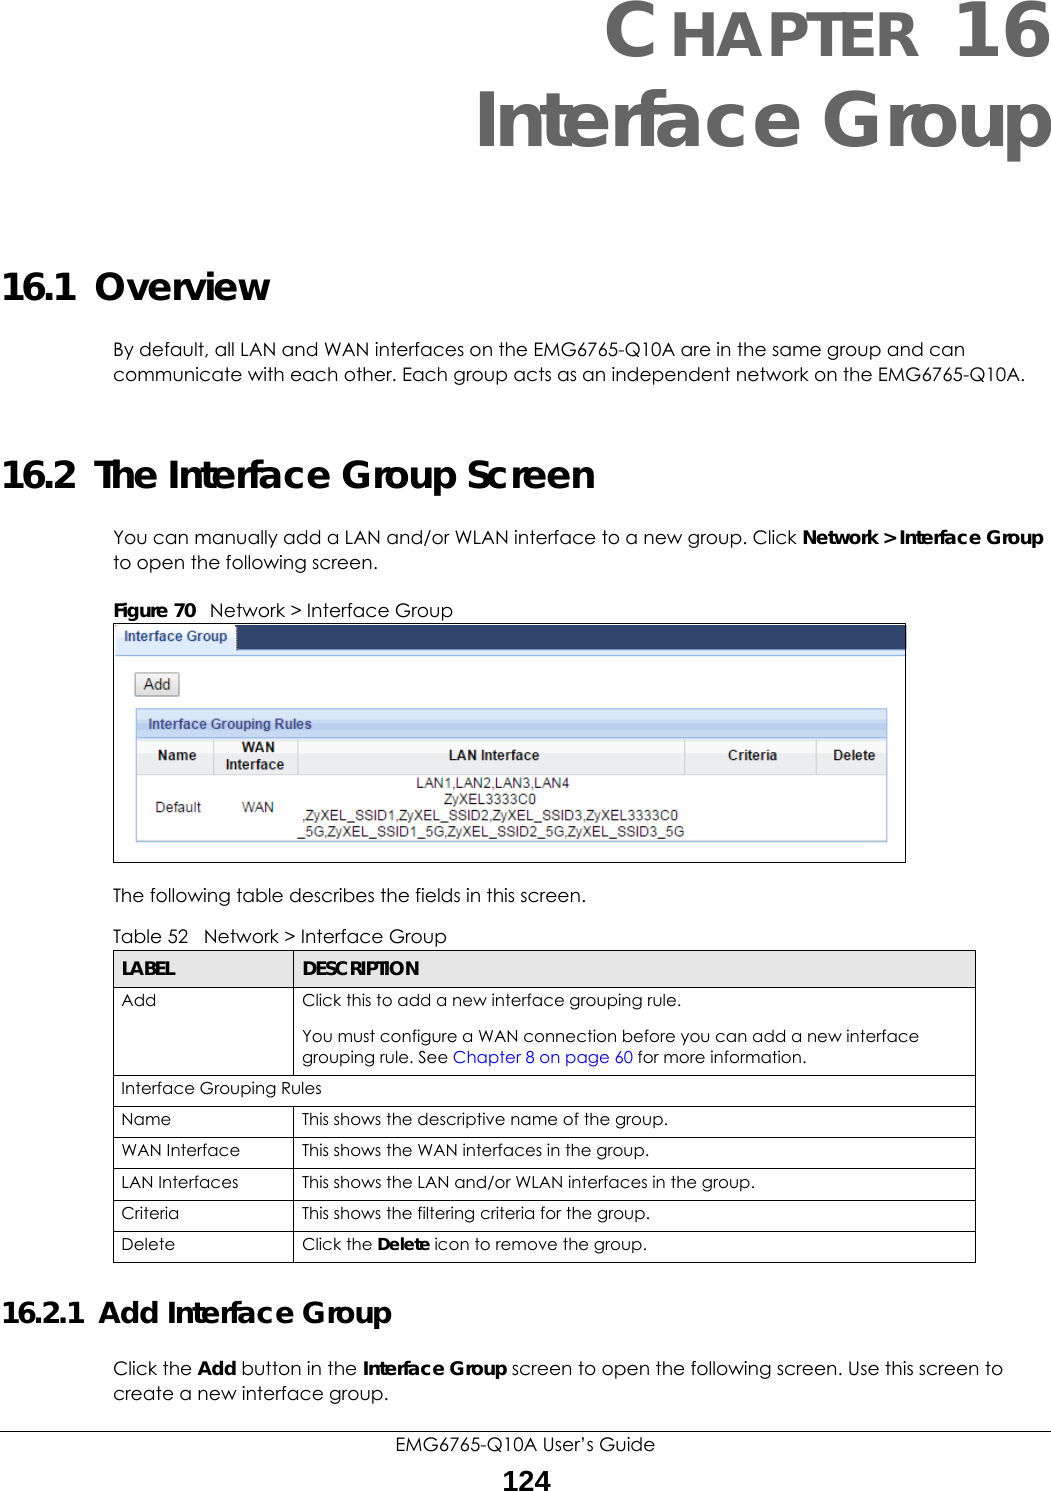 EMG6765-Q10A User’s Guide124CHAPTER 16Interface Group16.1  OverviewBy default, all LAN and WAN interfaces on the EMG6765-Q10A are in the same group and can communicate with each other. Each group acts as an independent network on the EMG6765-Q10A. 16.2  The Interface Group ScreenYou can manually add a LAN and/or WLAN interface to a new group. Click Network &gt; Interface Group to open the following screen. Figure 70   Network &gt; Interface Group The following table describes the fields in this screen. 16.2.1  Add Interface GroupClick the Add button in the Interface Group screen to open the following screen. Use this screen to create a new interface group. Table 52   Network &gt; Interface GroupLABEL DESCRIPTIONAdd Click this to add a new interface grouping rule. You must configure a WAN connection before you can add a new interface grouping rule. See Chapter 8 on page 60 for more information. Interface Grouping RulesName This shows the descriptive name of the group.WAN Interface This shows the WAN interfaces in the group.LAN Interfaces This shows the LAN and/or WLAN interfaces in the group.Criteria This shows the filtering criteria for the group.Delete Click the Delete icon to remove the group.